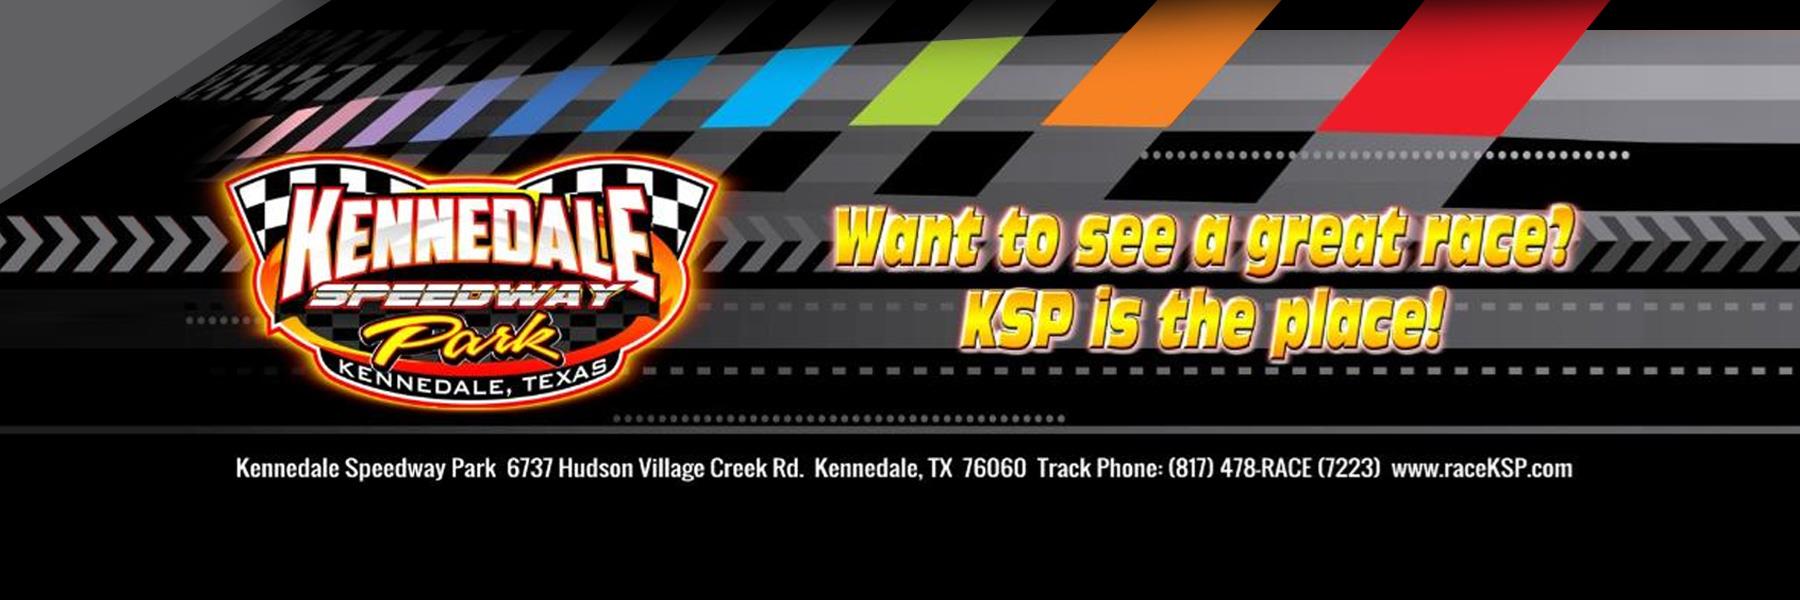 6/18/2022 - Kennedale Speedway Park